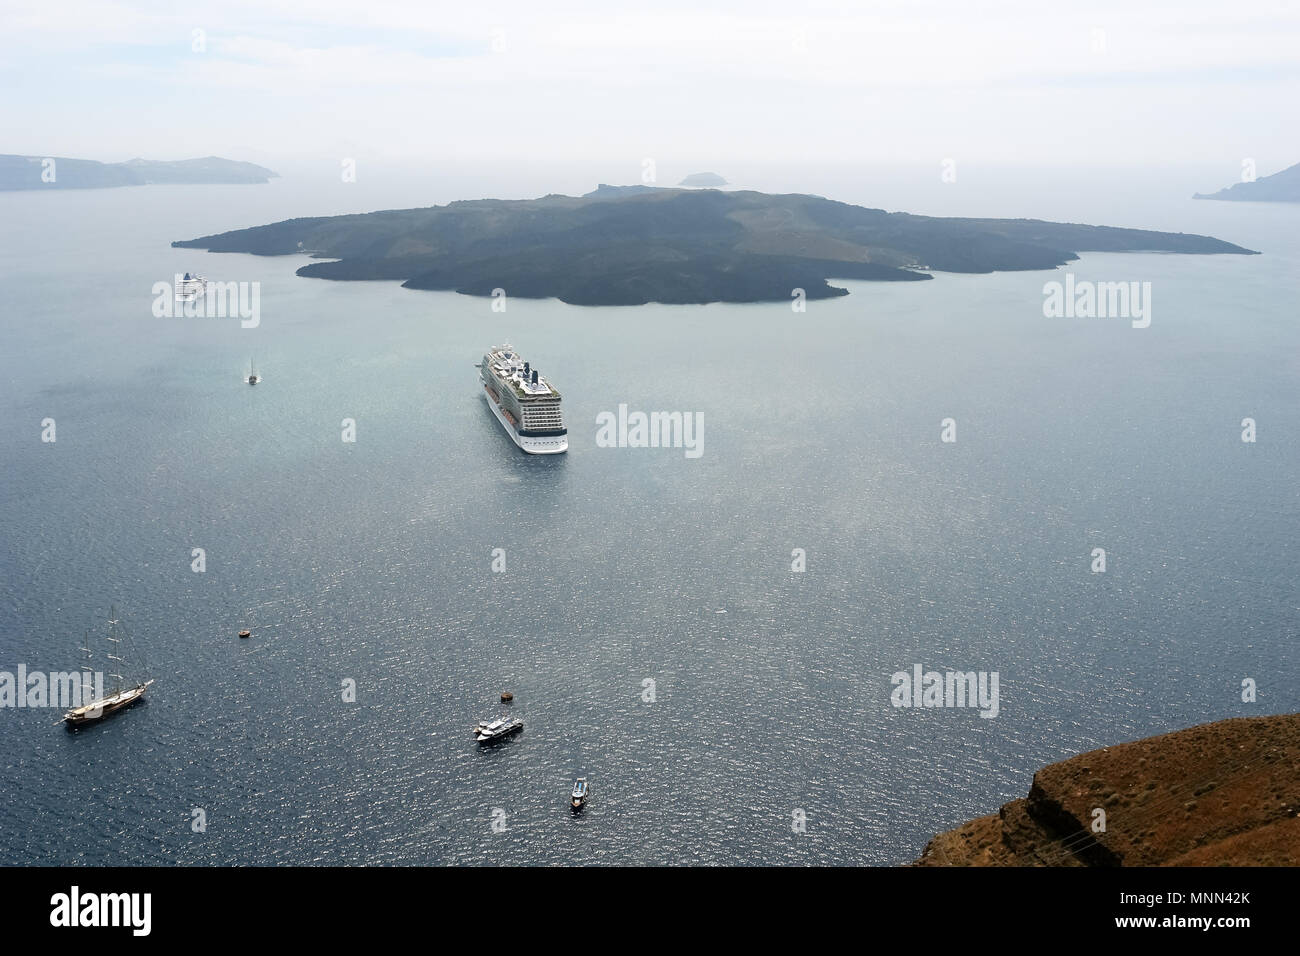 View of a large passenger liner, small ships and a volcanic island in the bay of Santorini, Greece. Stock Photo